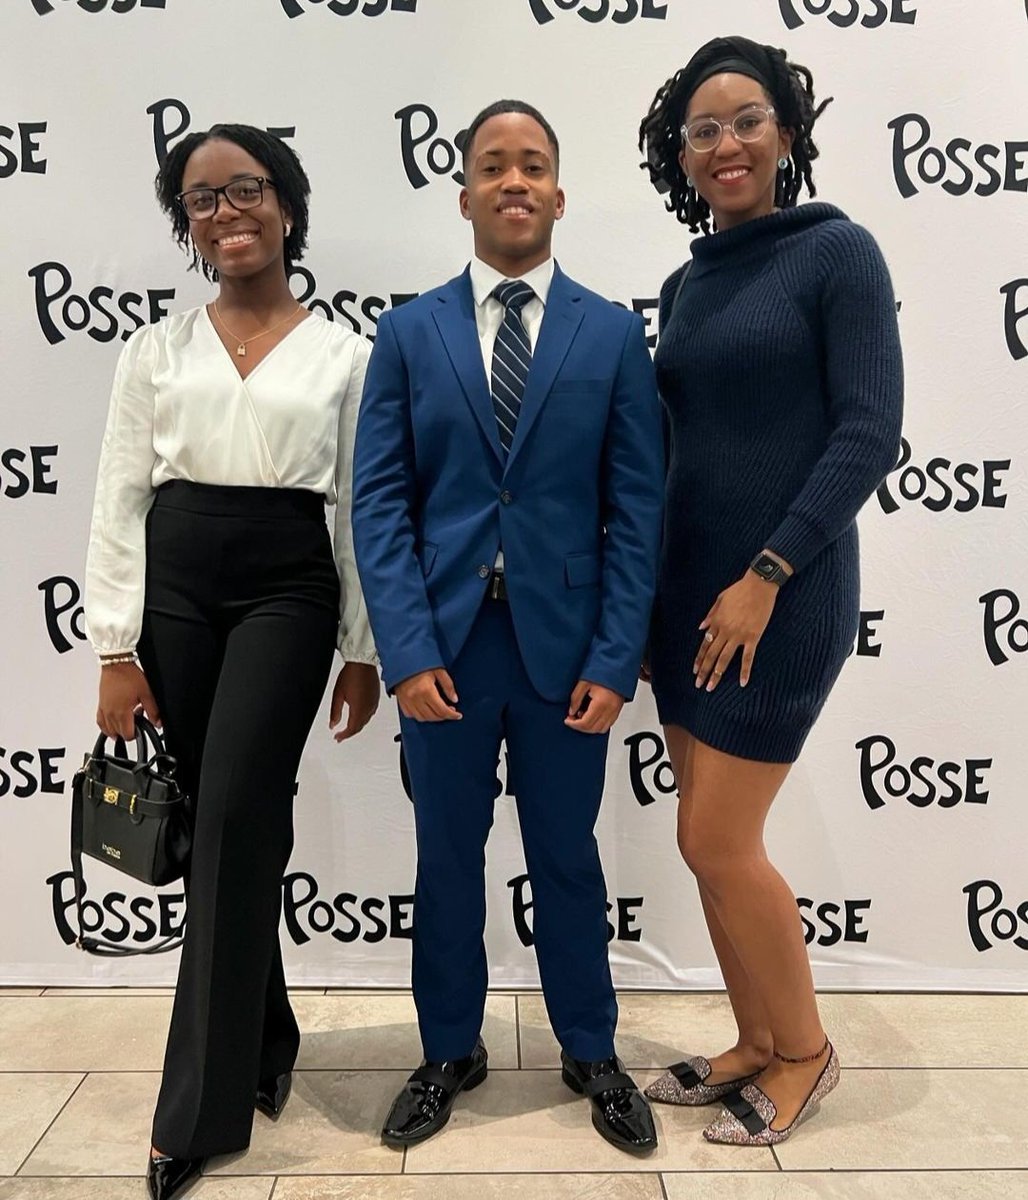 Congratulations to our Posse Scholarship Recipients! Dennis will be attending Syracuse, and Nosta will be attending Mount Holyoke in the Fall!! Job well done, Class of 2024 Grads! 💚🩶💚🩶 #YourBestChoiceMDCPS @SuptDotres @MDCPS @MDCPSNorth @MrsMStewart_